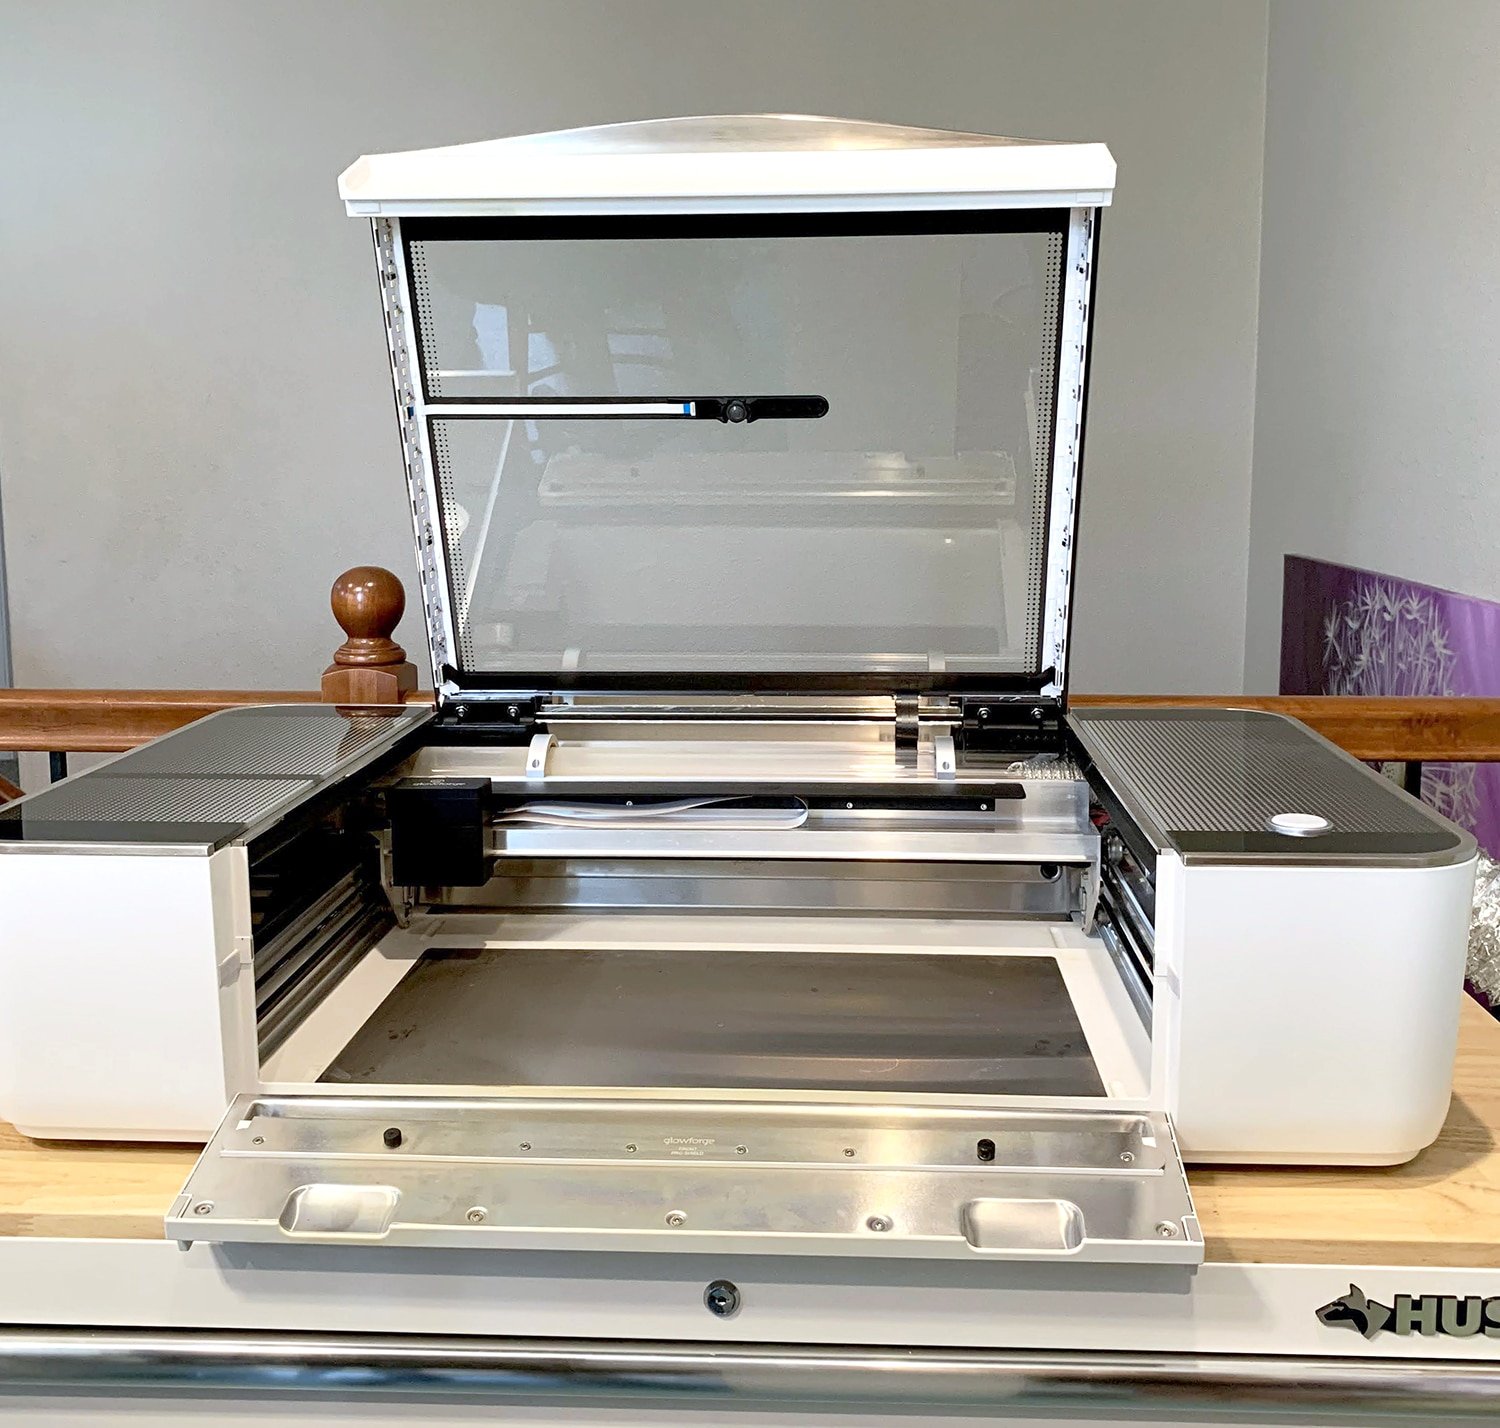 Open Glowforge Pro machine with Crumb Tray Removed